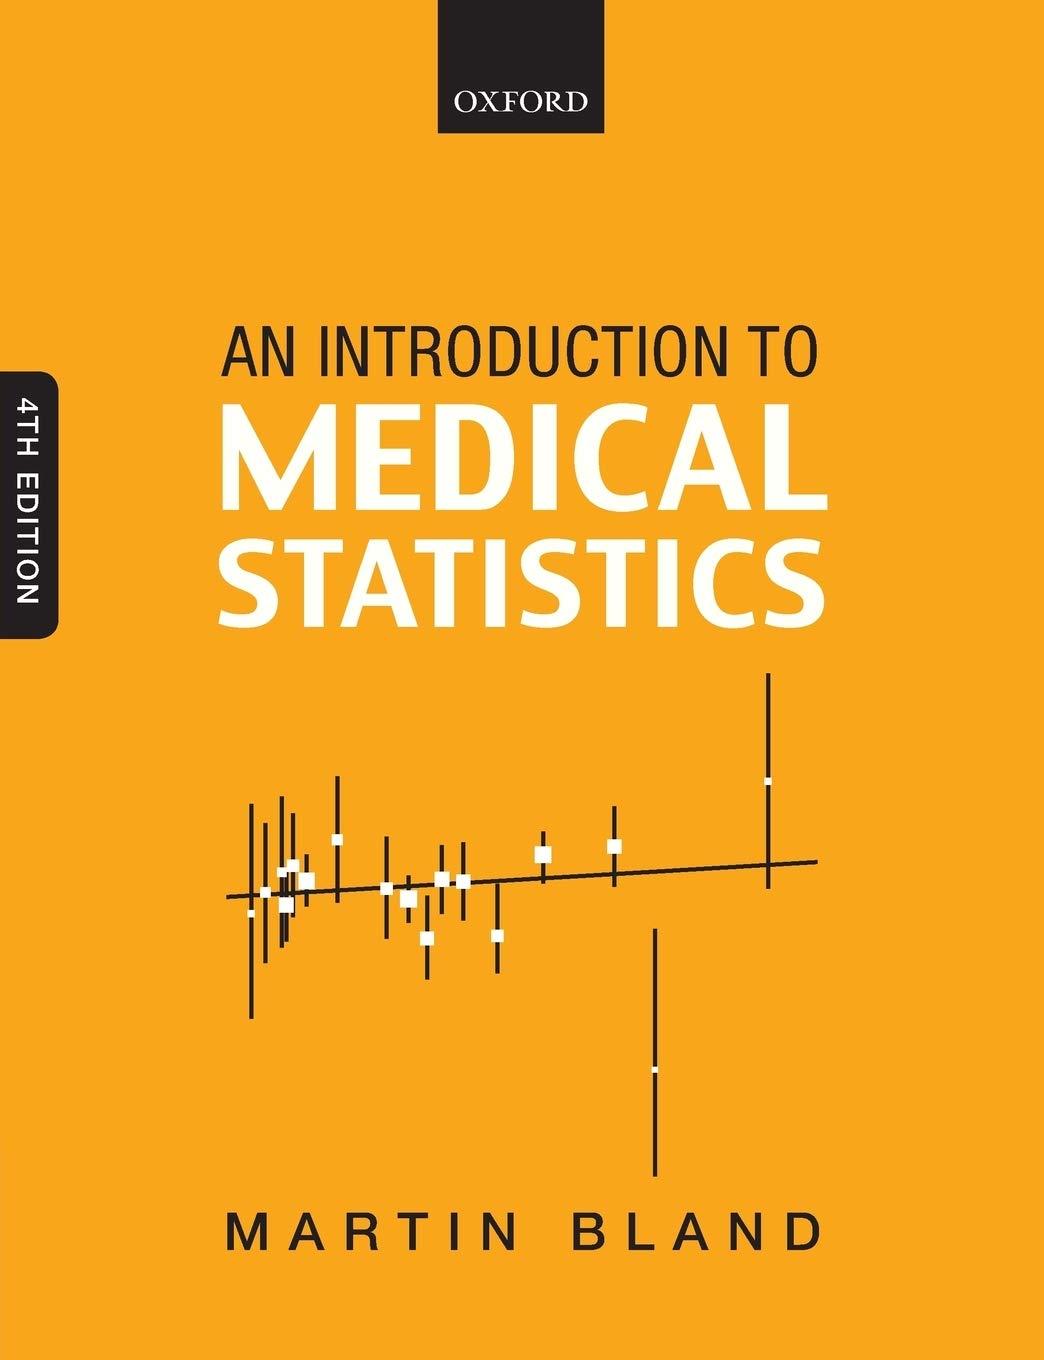 an introduction to medical statistics 4th edition martin bland 0199589925, 978-0199589920